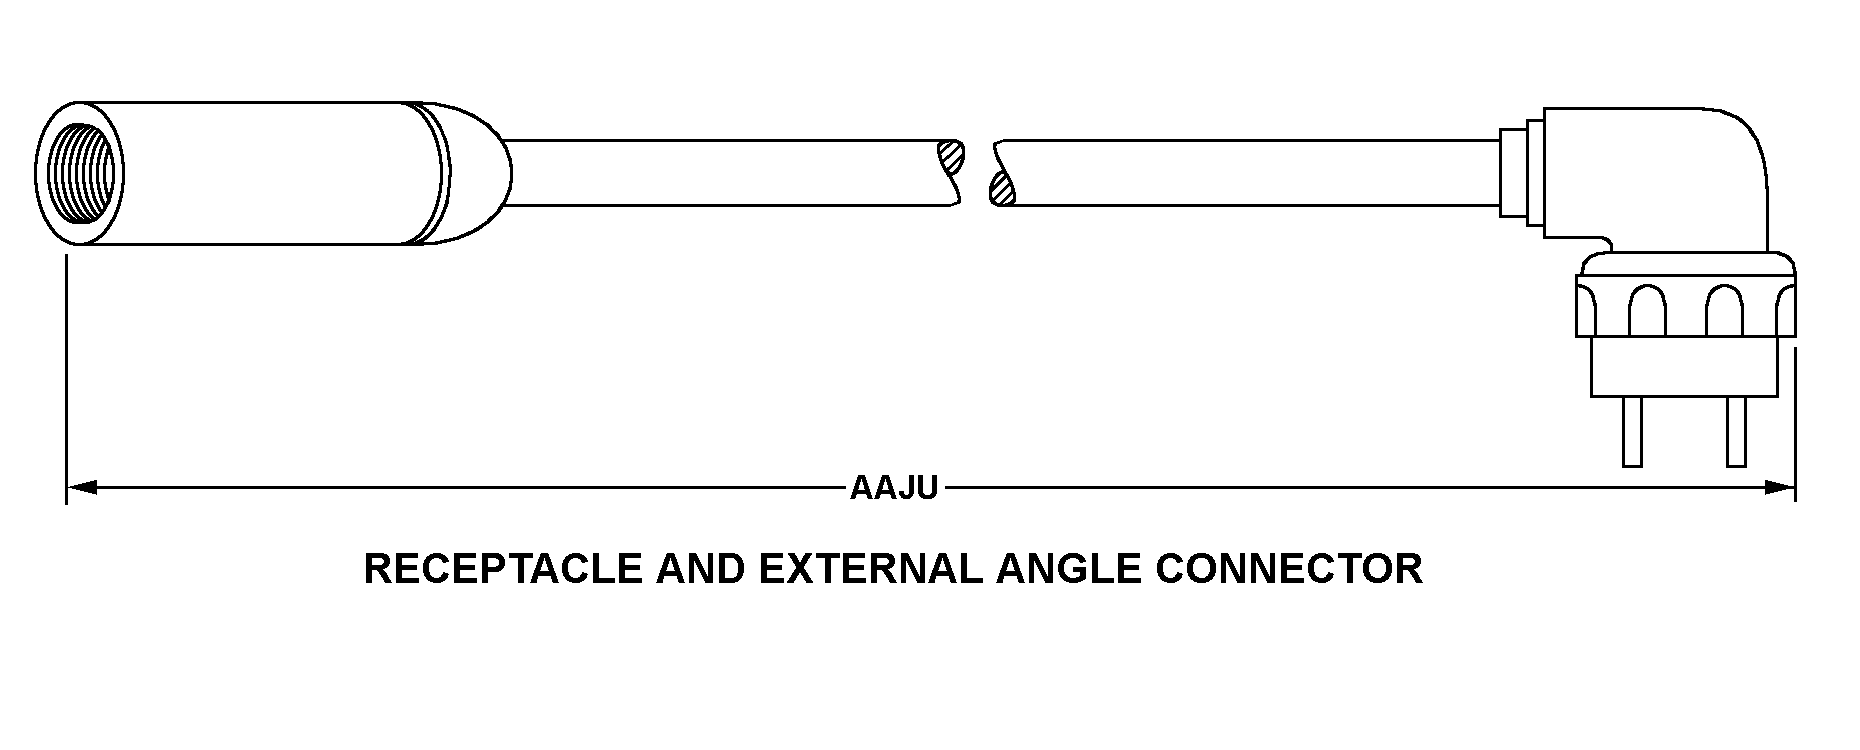 RECEPTACLE AND EXTERNAL ANGLE CONNECTOR style nsn 5995-01-192-2573